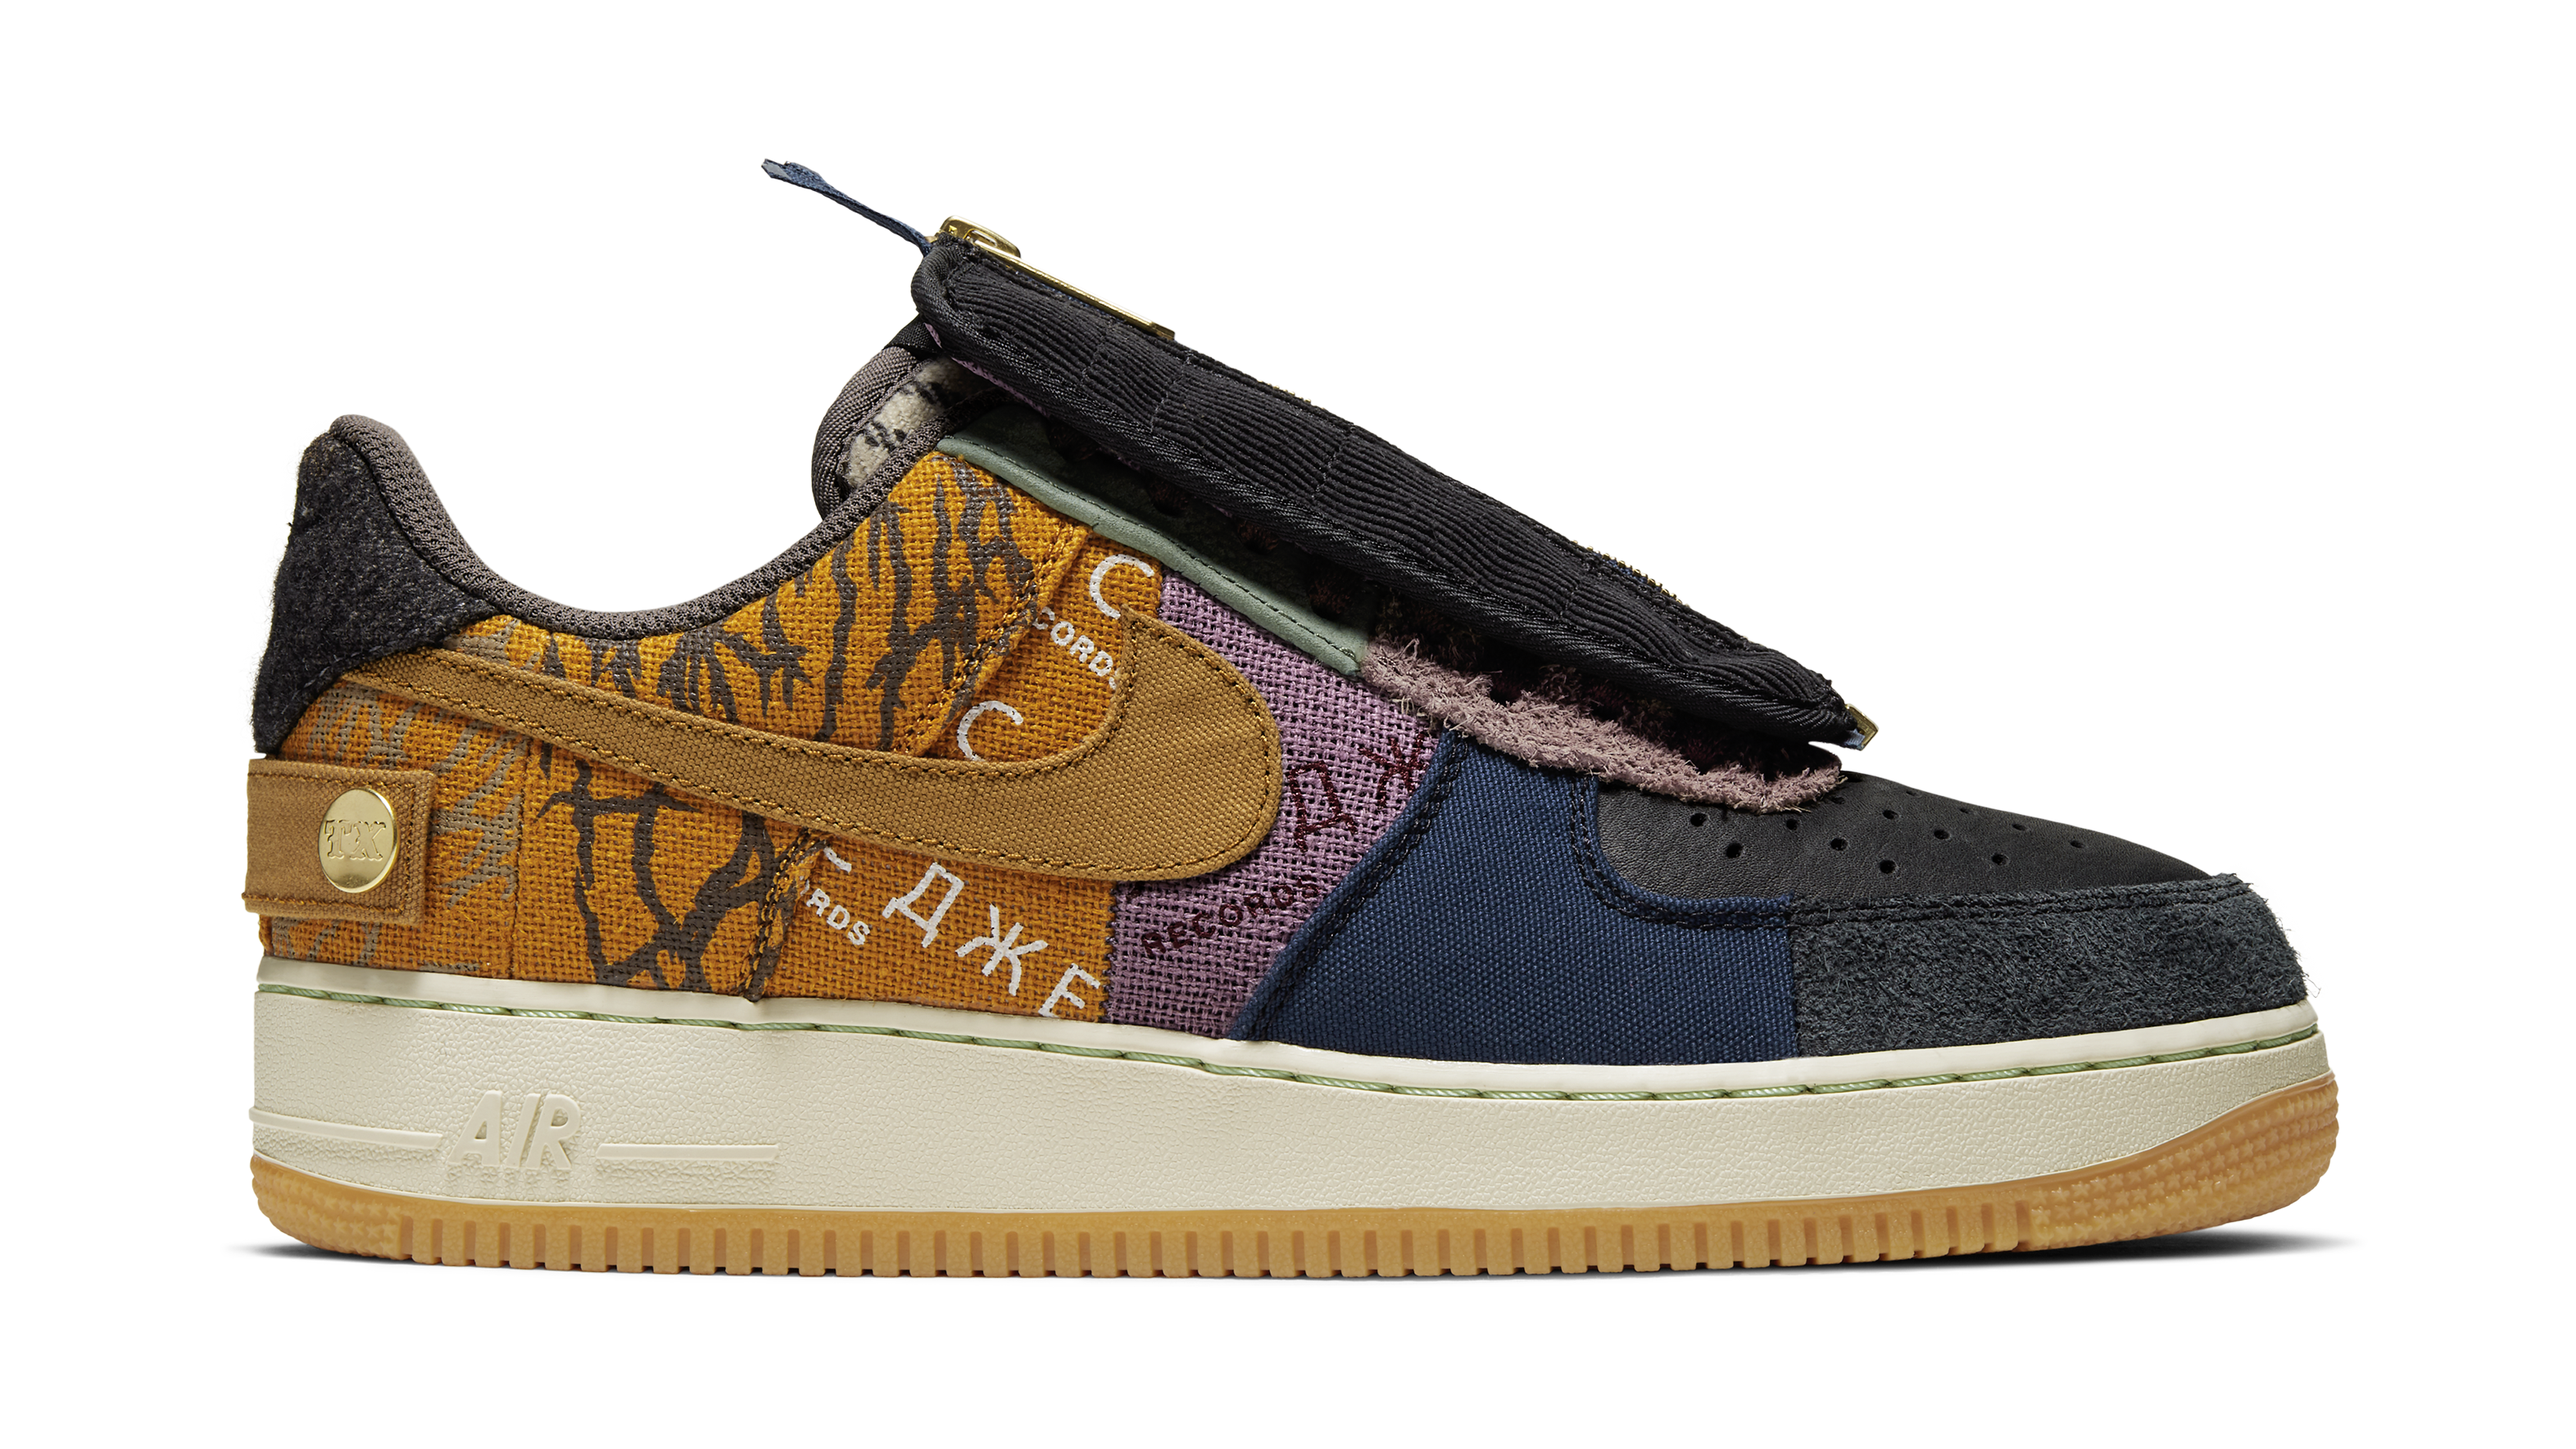 travis scott nike air force 1 low cn2405 900 lateral